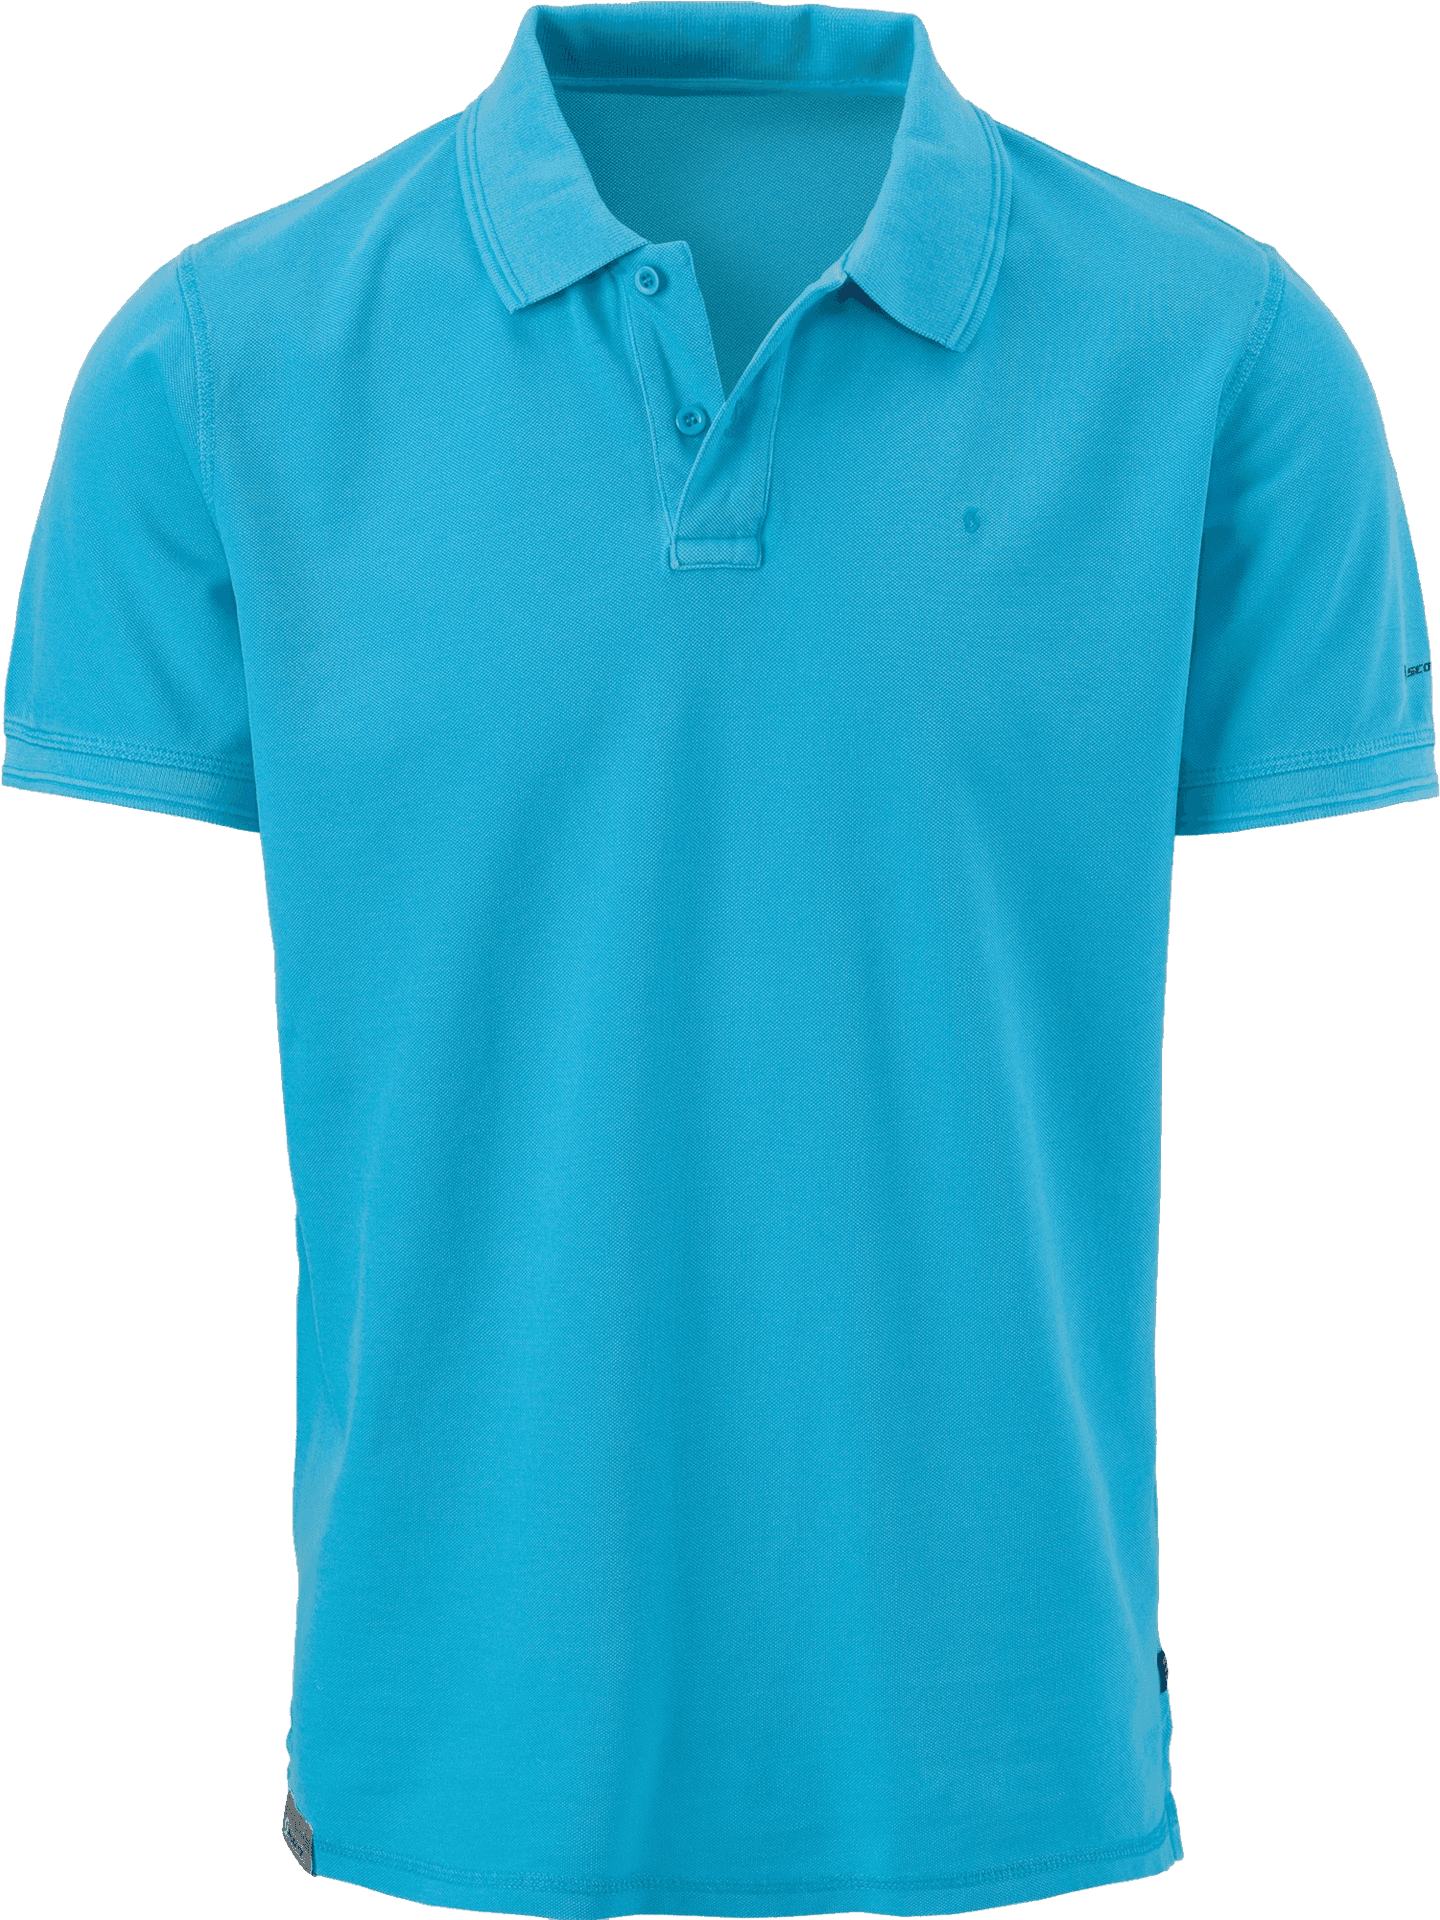 Blue Polo Shirt Product Image PNG